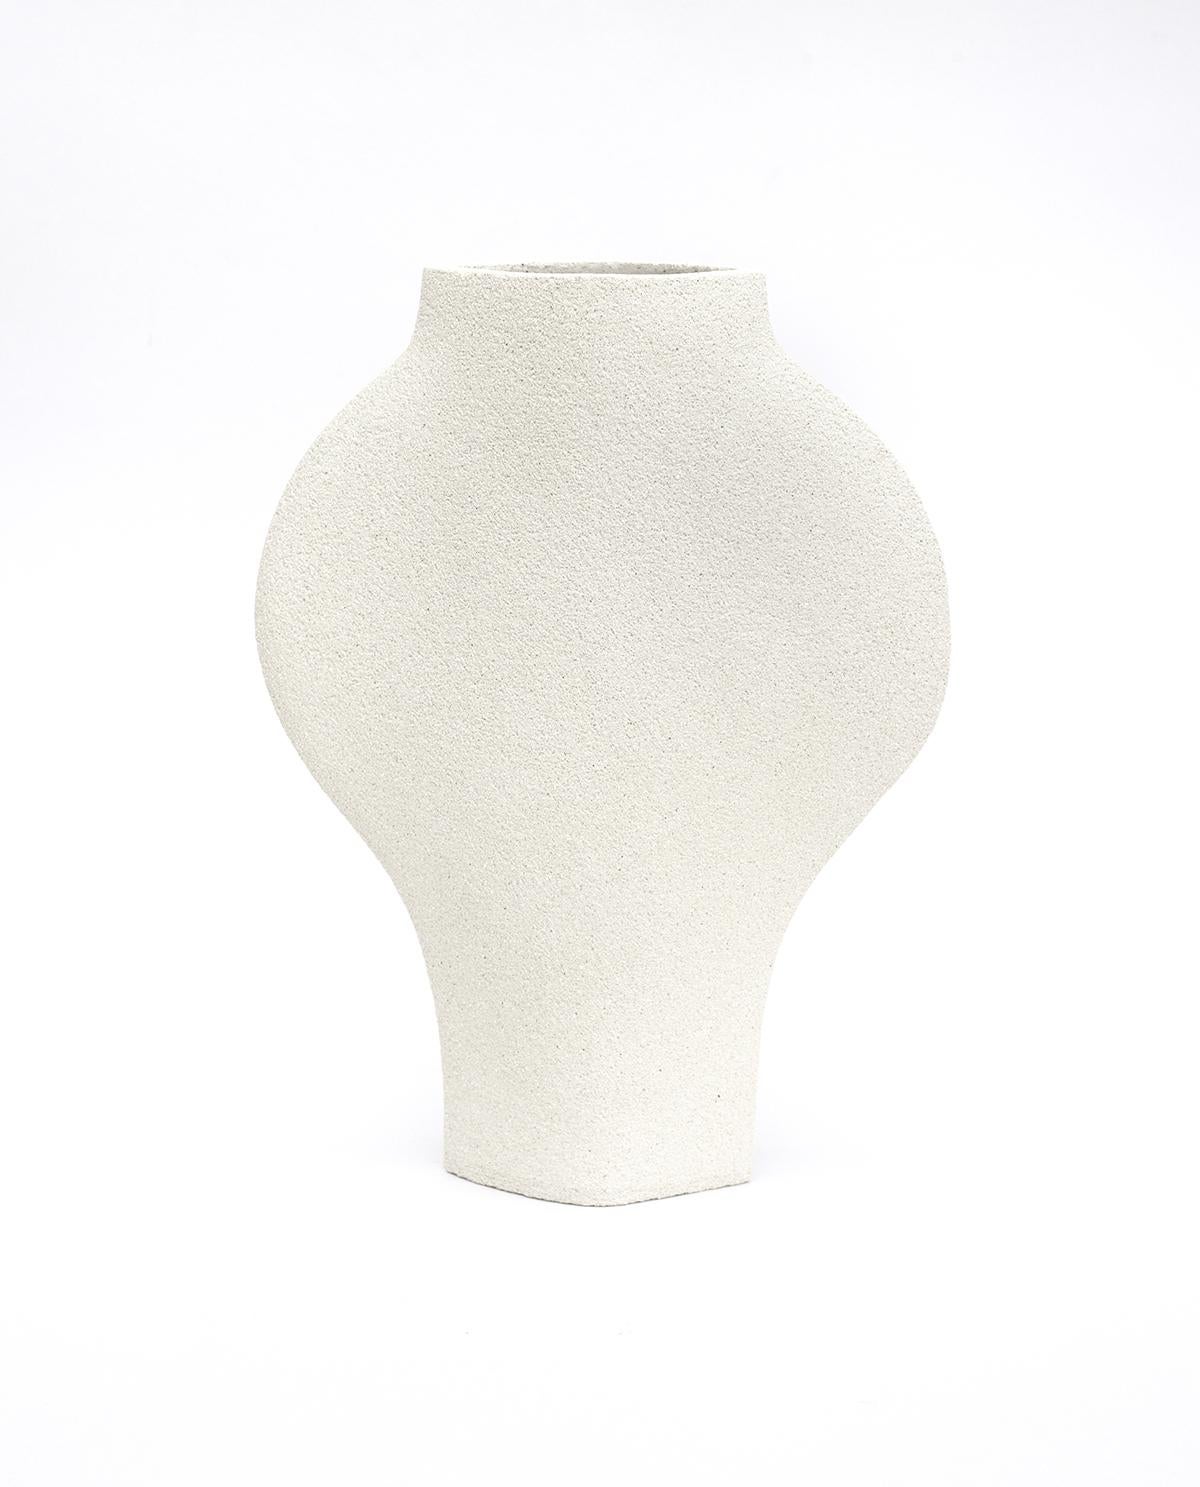 European 21st Century ‘Dal Lines’, in White Ceramic, Hand-Crafted in France For Sale